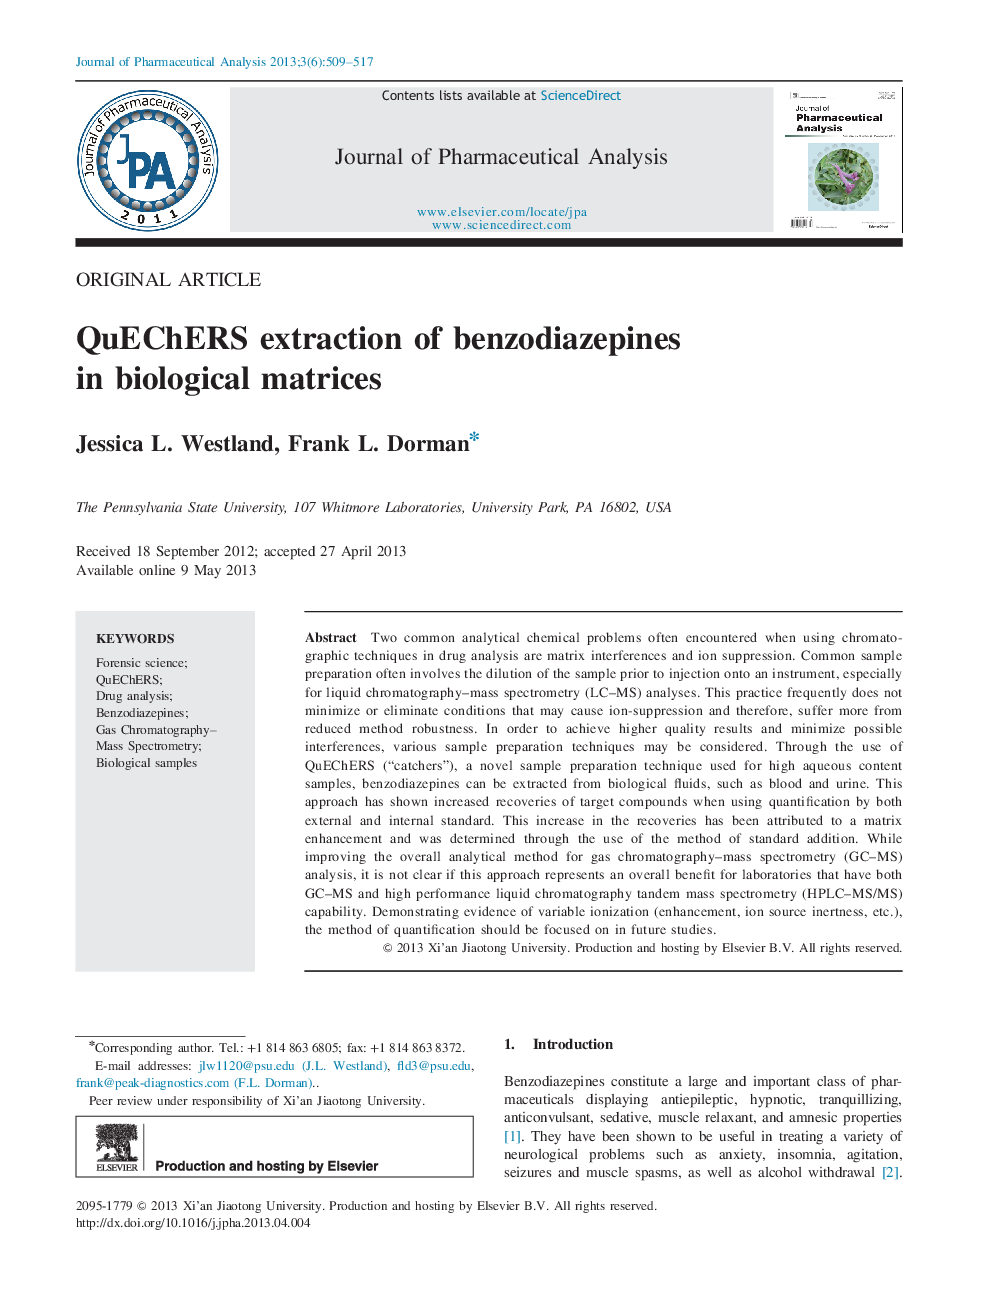 QuEChERS extraction of benzodiazepines in biological matrices 